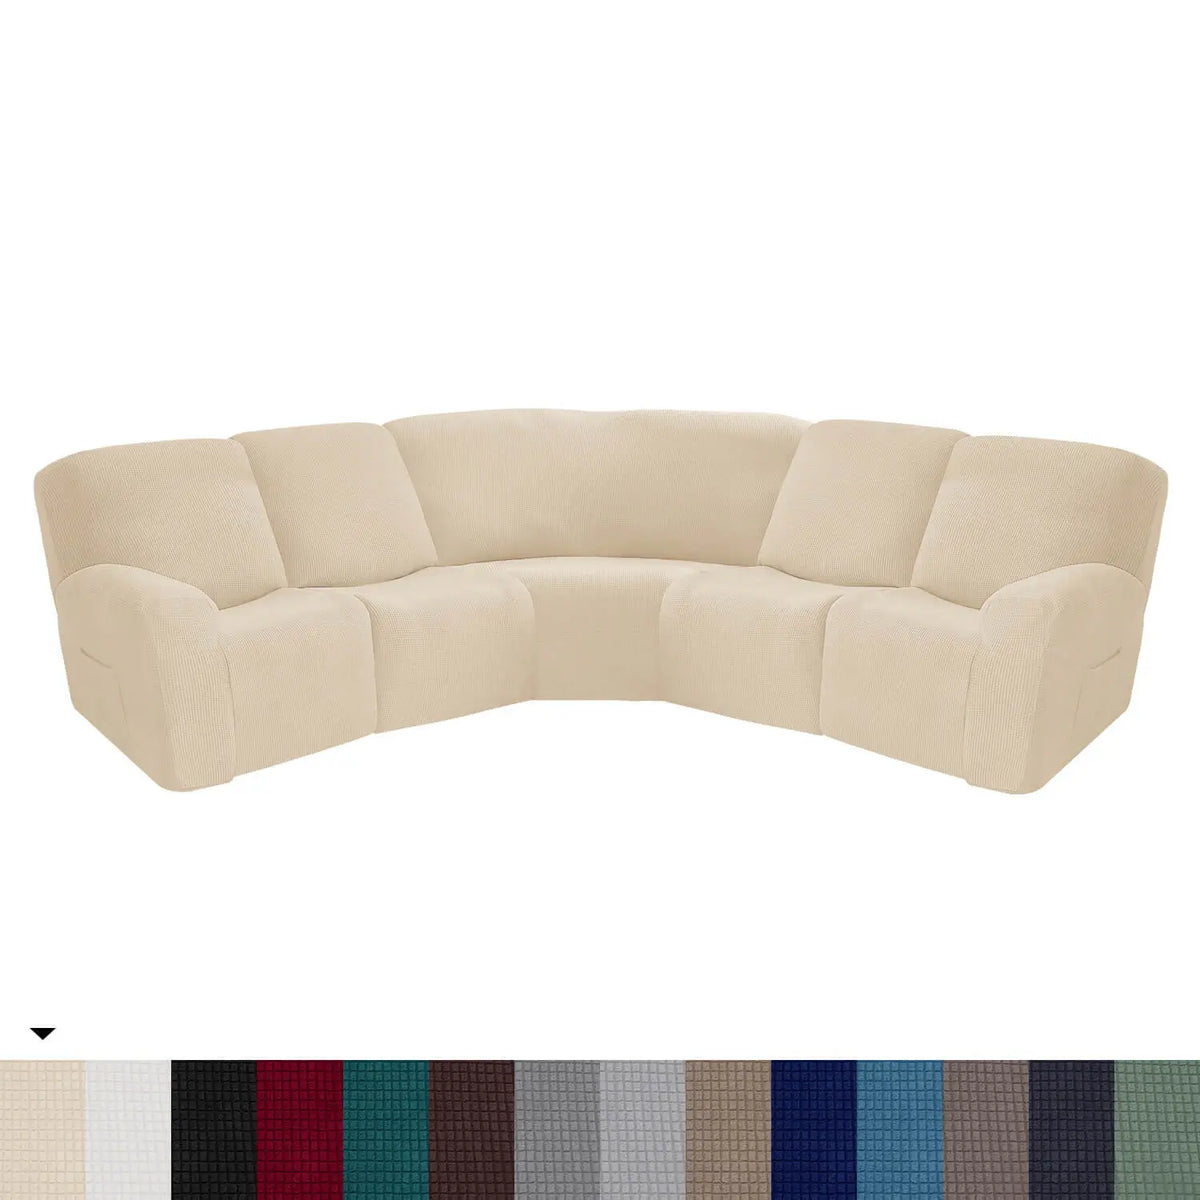 Crfatop L Shape Sectional Recliner Sofa Covers Corner Couch Covers Beige